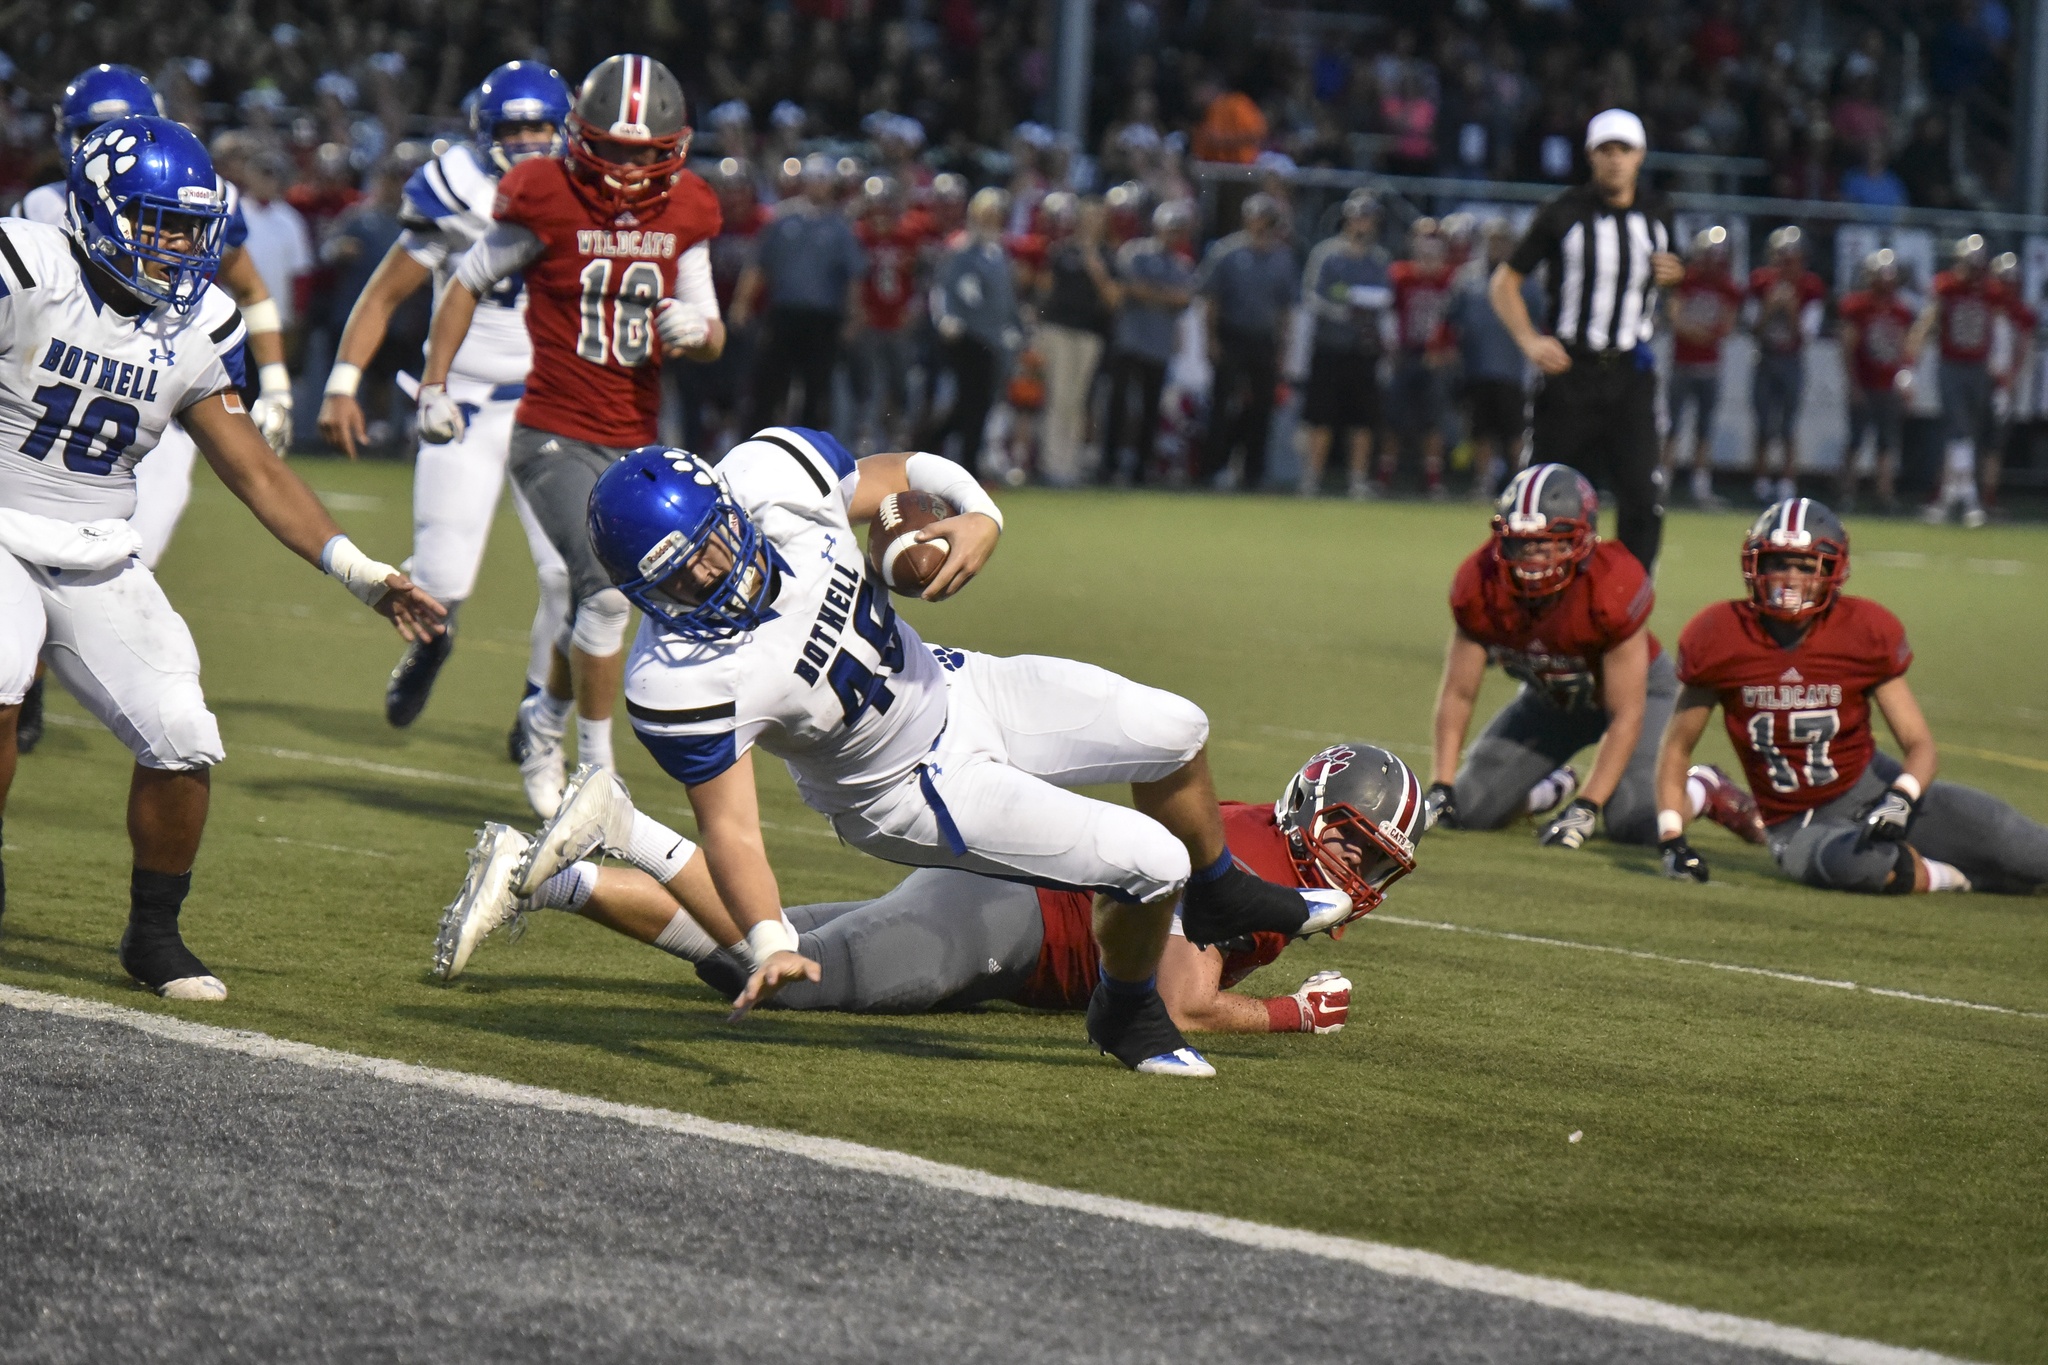 Bothell running back Parker Chamberlin falls into the end zone during the Cougars’ win over Mount Si on Friday